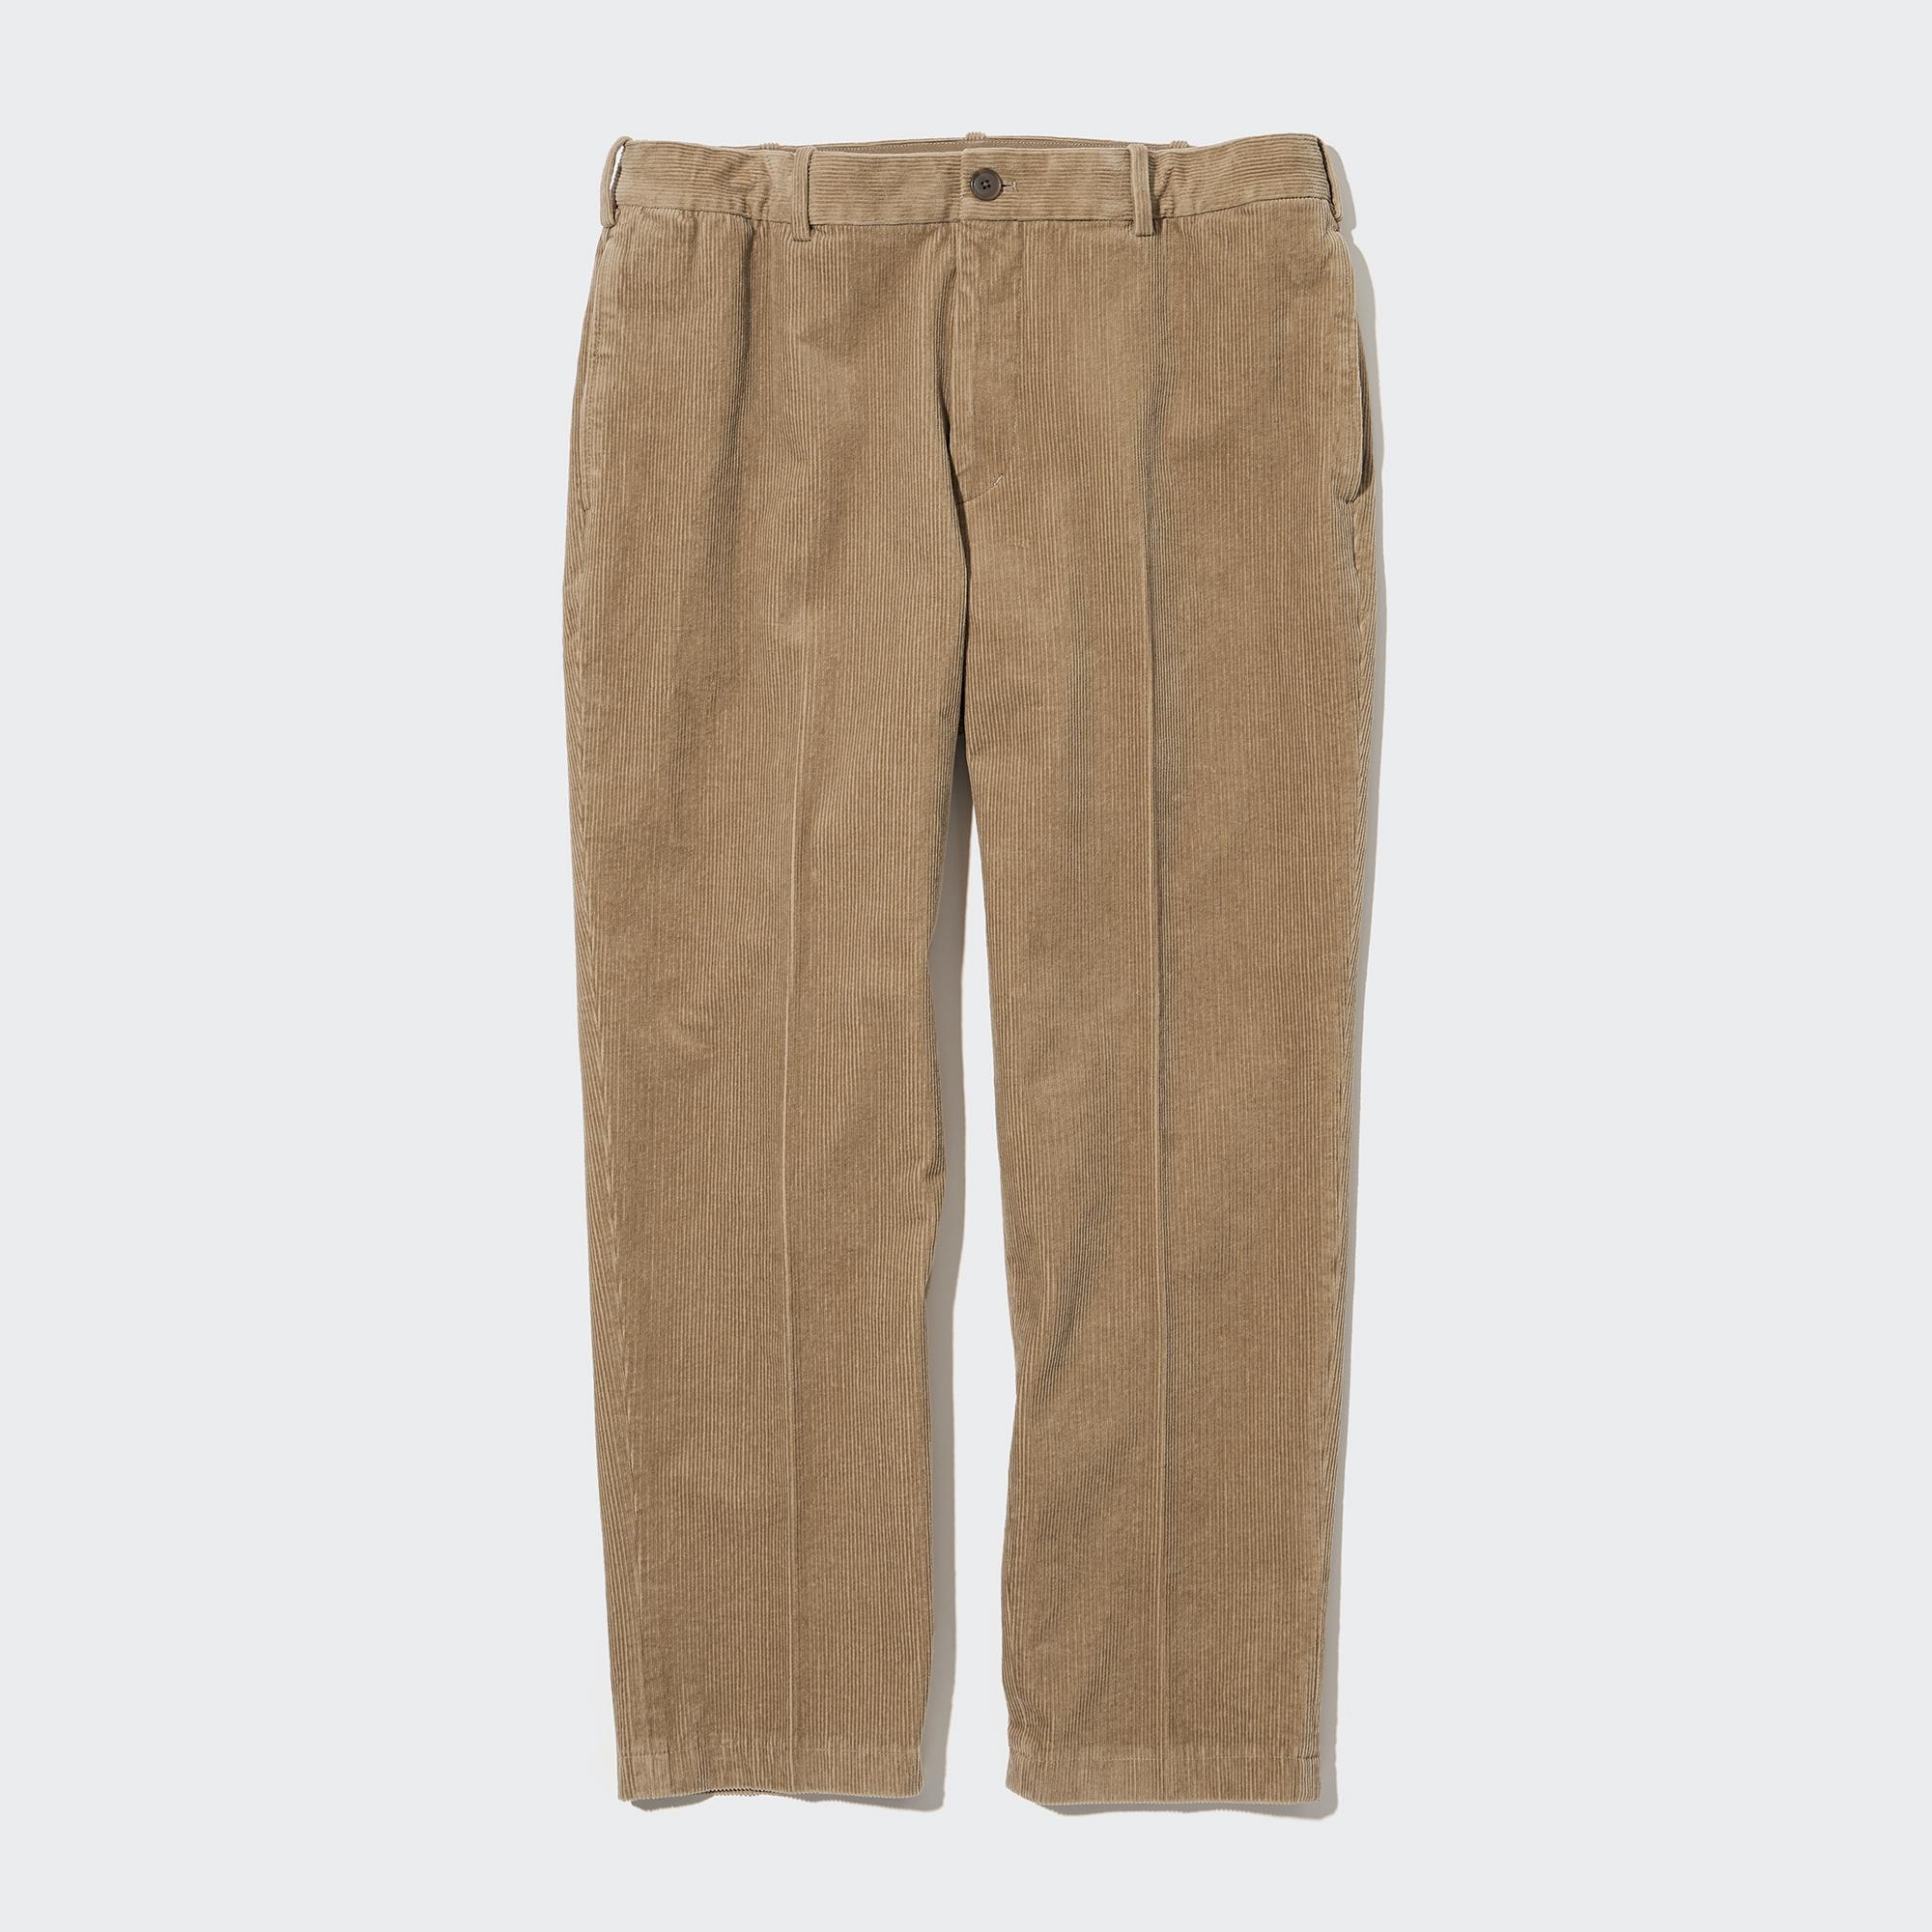 Check styling ideas forSmart Ankle Pants 2Way Stretch CottonMesh  Leather Wide Belt UNIQLO US